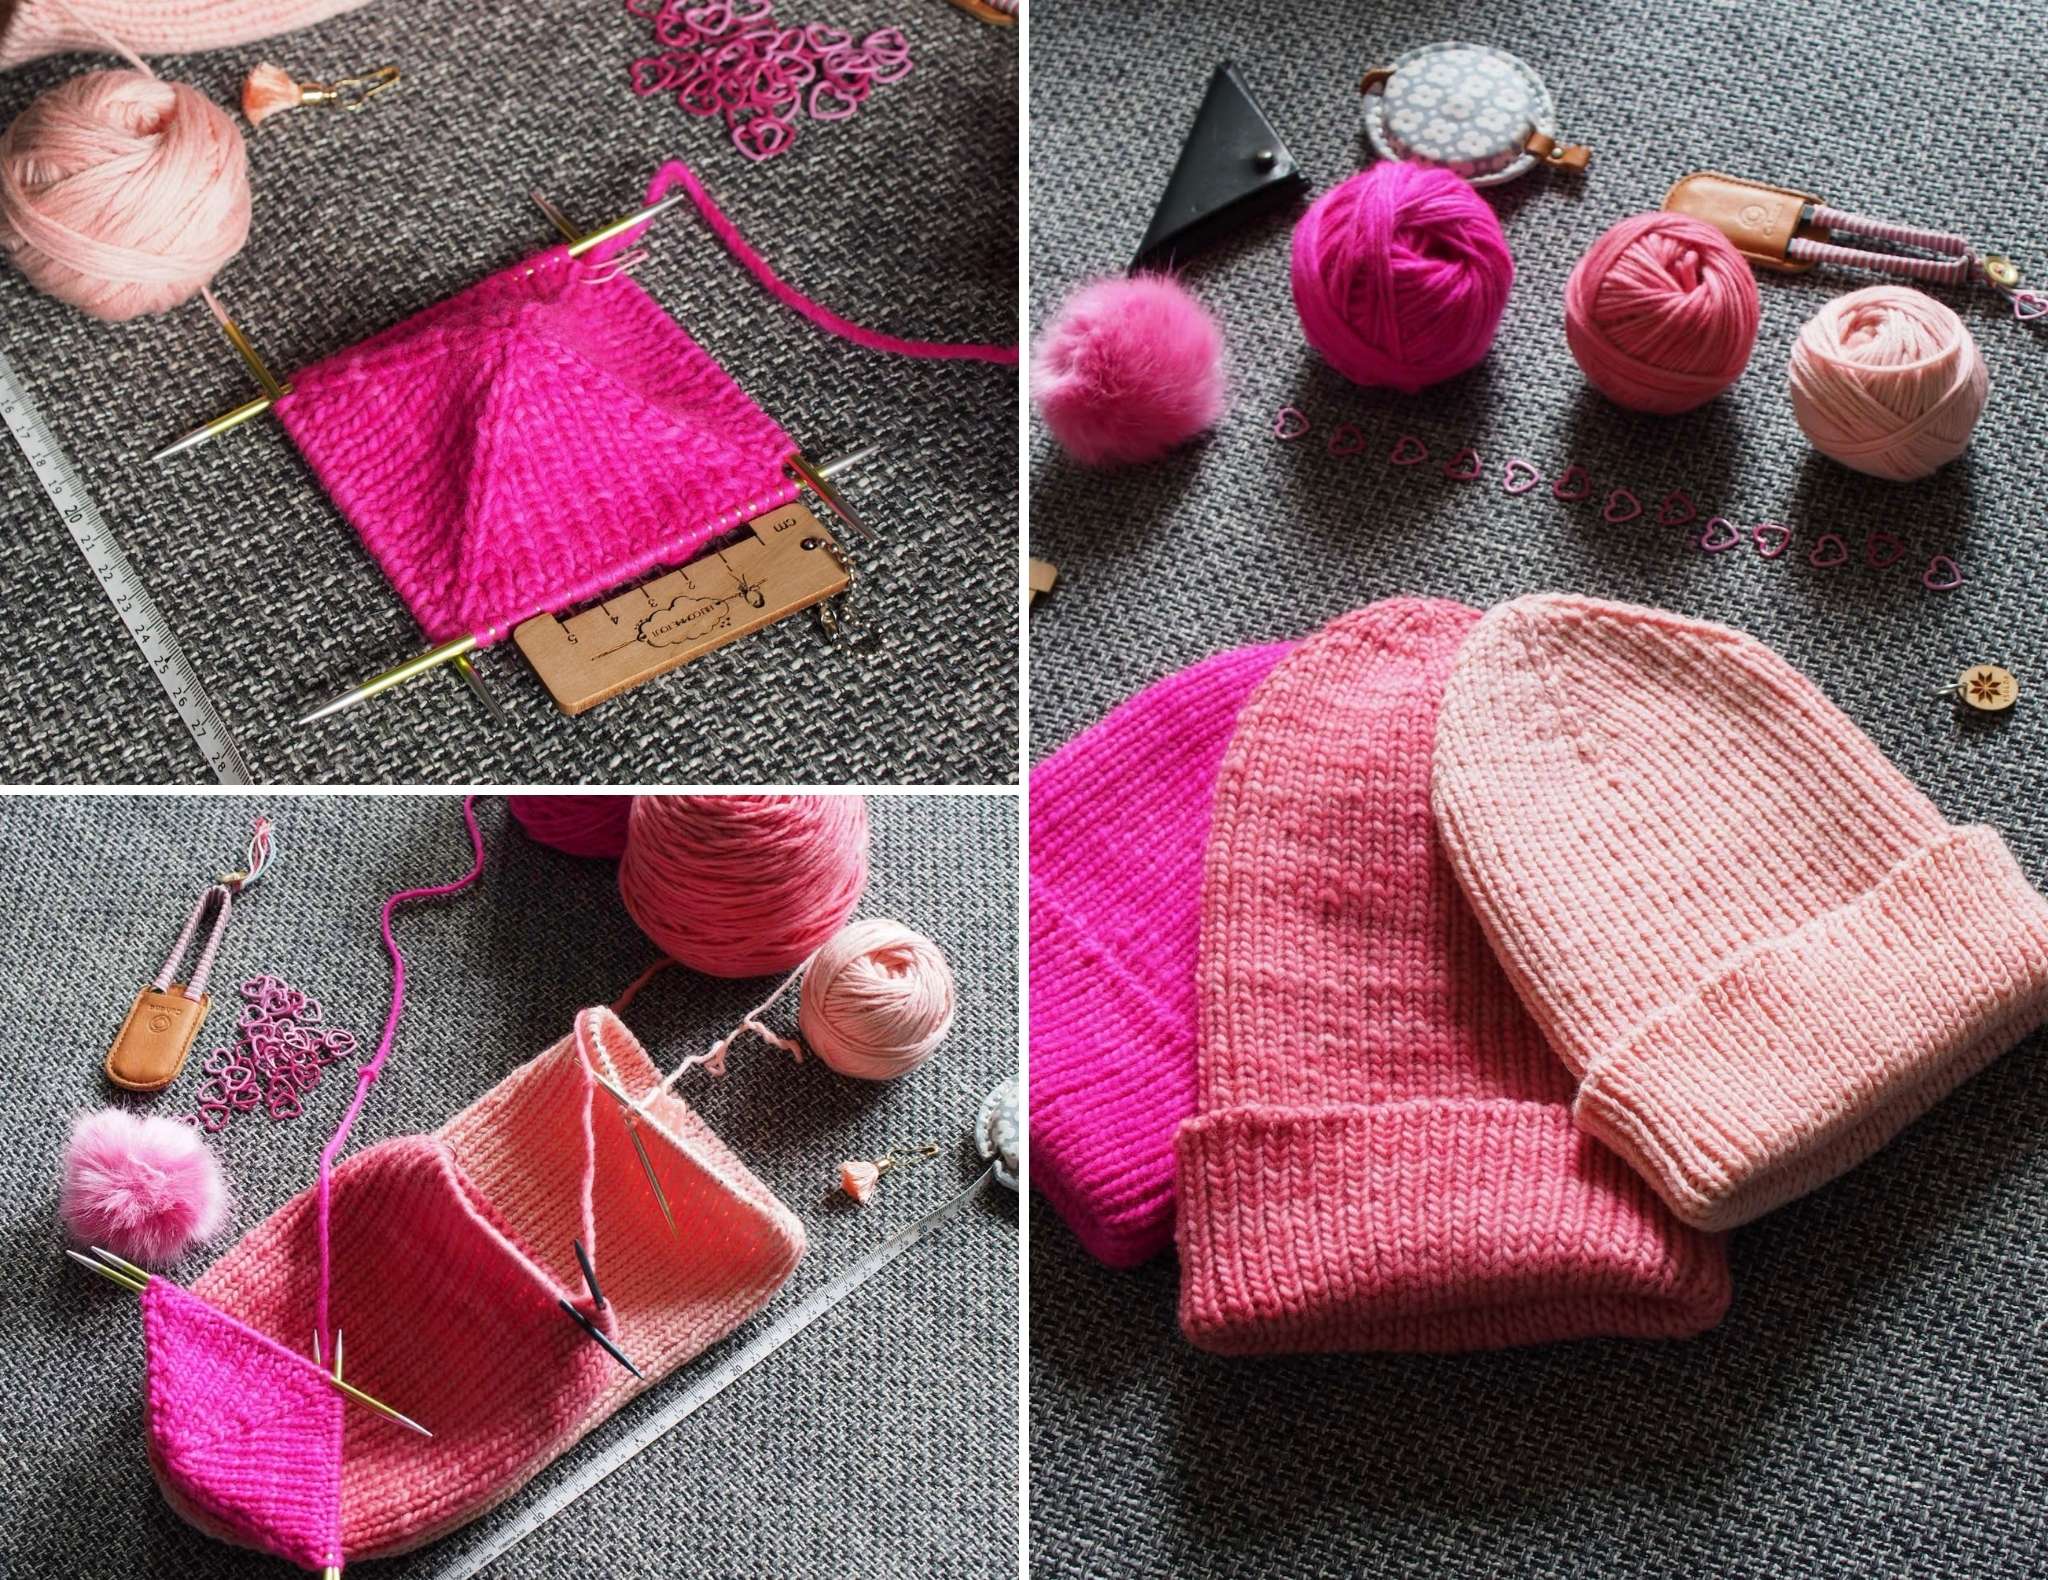 A collage of images of 3 pink hats pictured together with varying amounts of progress worked. Pom poms and tools are shown around them.